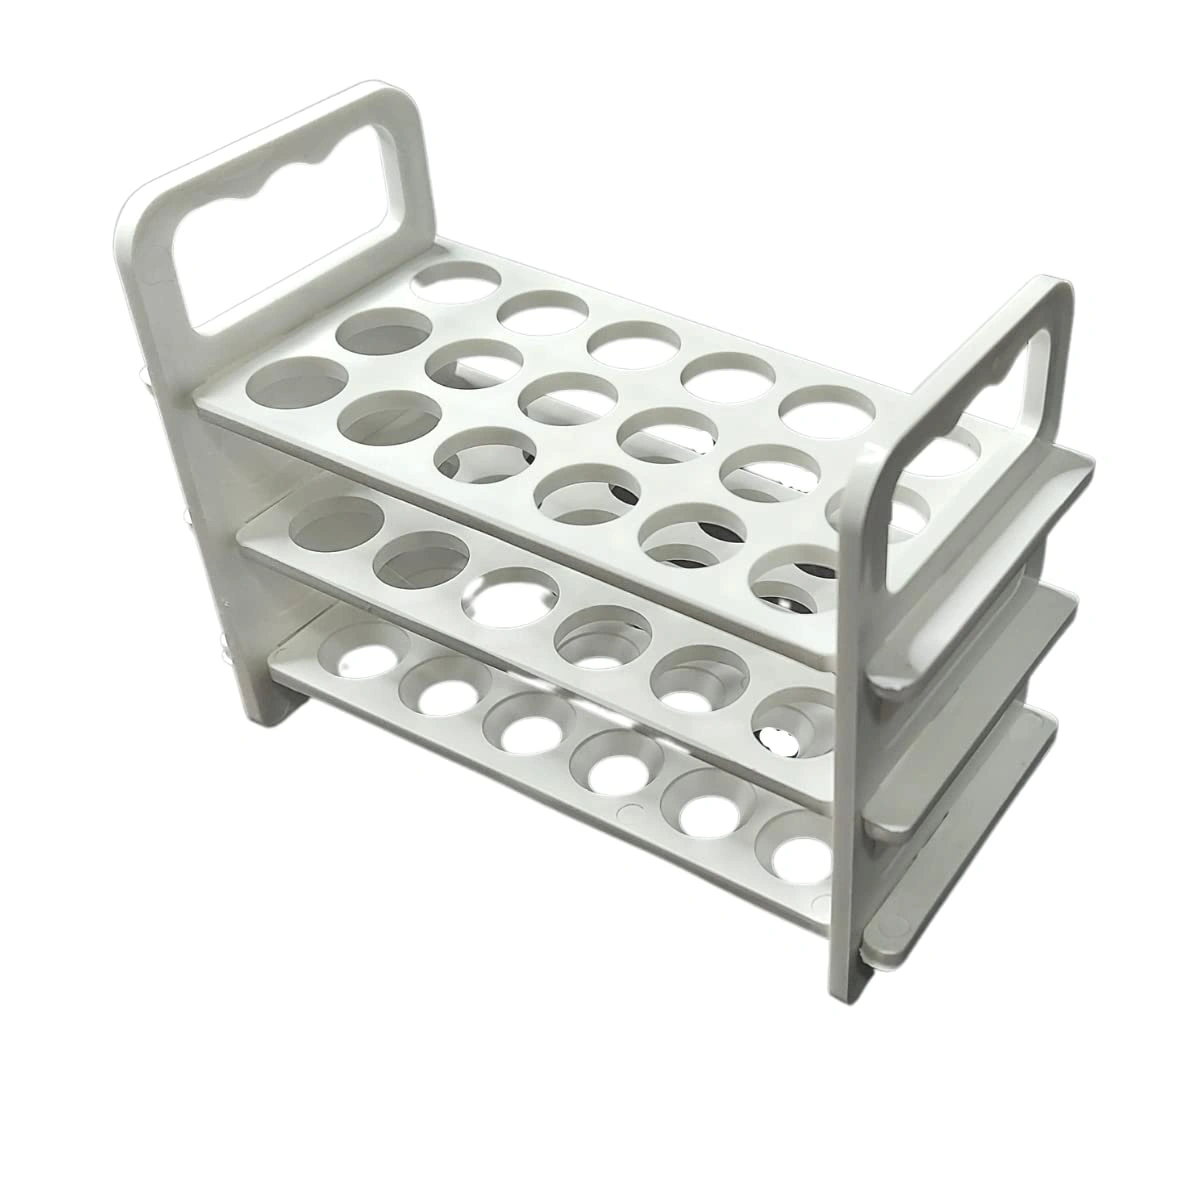 Test tube stand 3 TIER: 15mm × 18 Holes-2